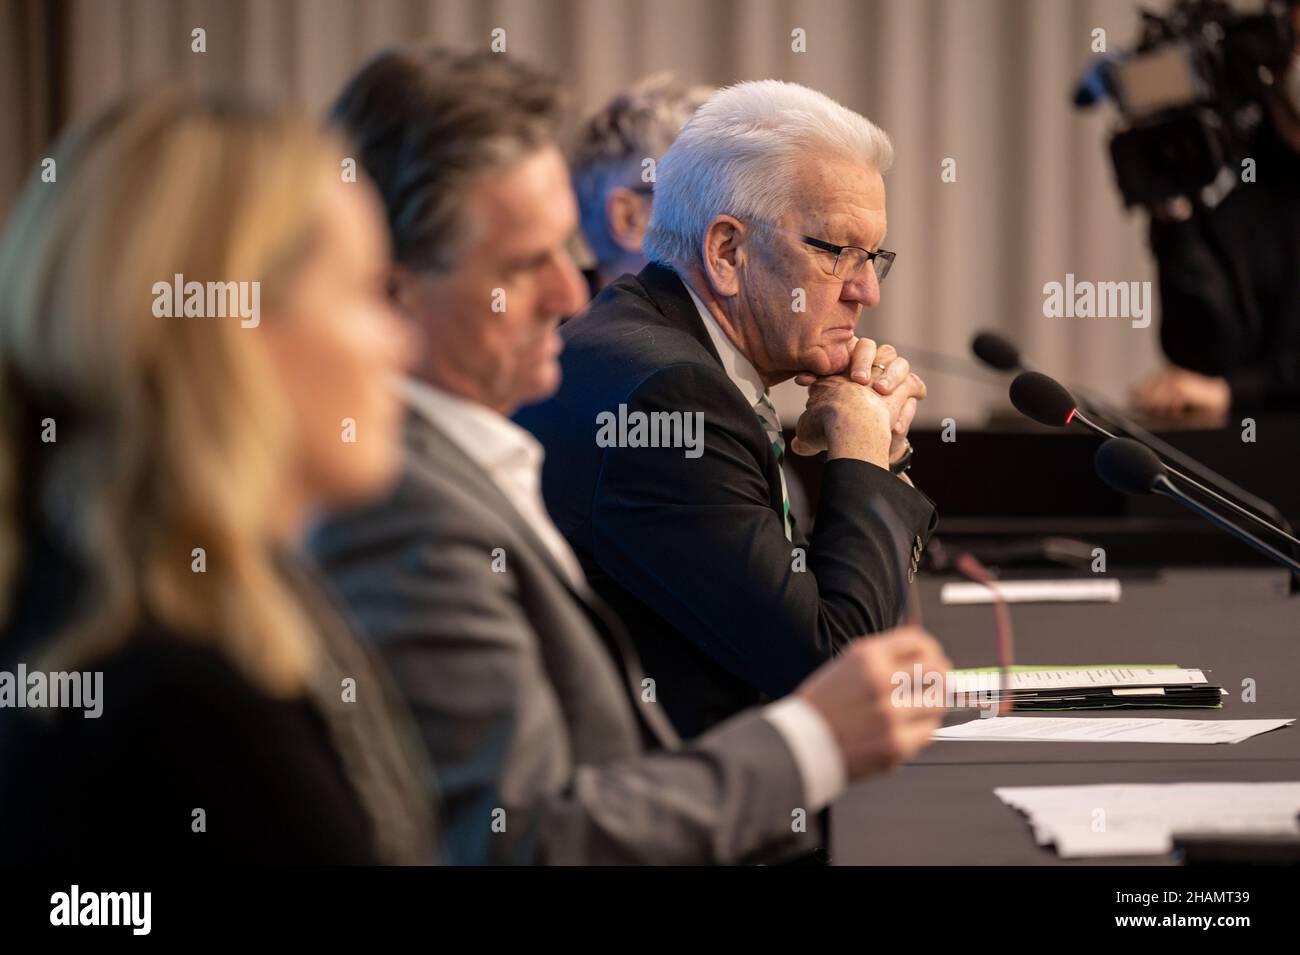 Stuttgart, Germany. 14th Dec, 2021. Winfried Kretschmann (Bündnis 90/Die Grünen, r-l), Minister President of Baden-Württemberg, Manfred Lucha (Bündnis 90/Die Grünen), Minister of Social Affairs of Baden-Württemberg, and Thekla Walker (Bündnis 90/Die Grünen), Minister of the Environment, Climate and Energy Economy in Baden-Württemberg, attend the government press conference in the Citizens' and Media Centre of the State Parliament of Baden-Württemberg. Credit: Marijan Murat/dpa/Alamy Live News Stock Photo